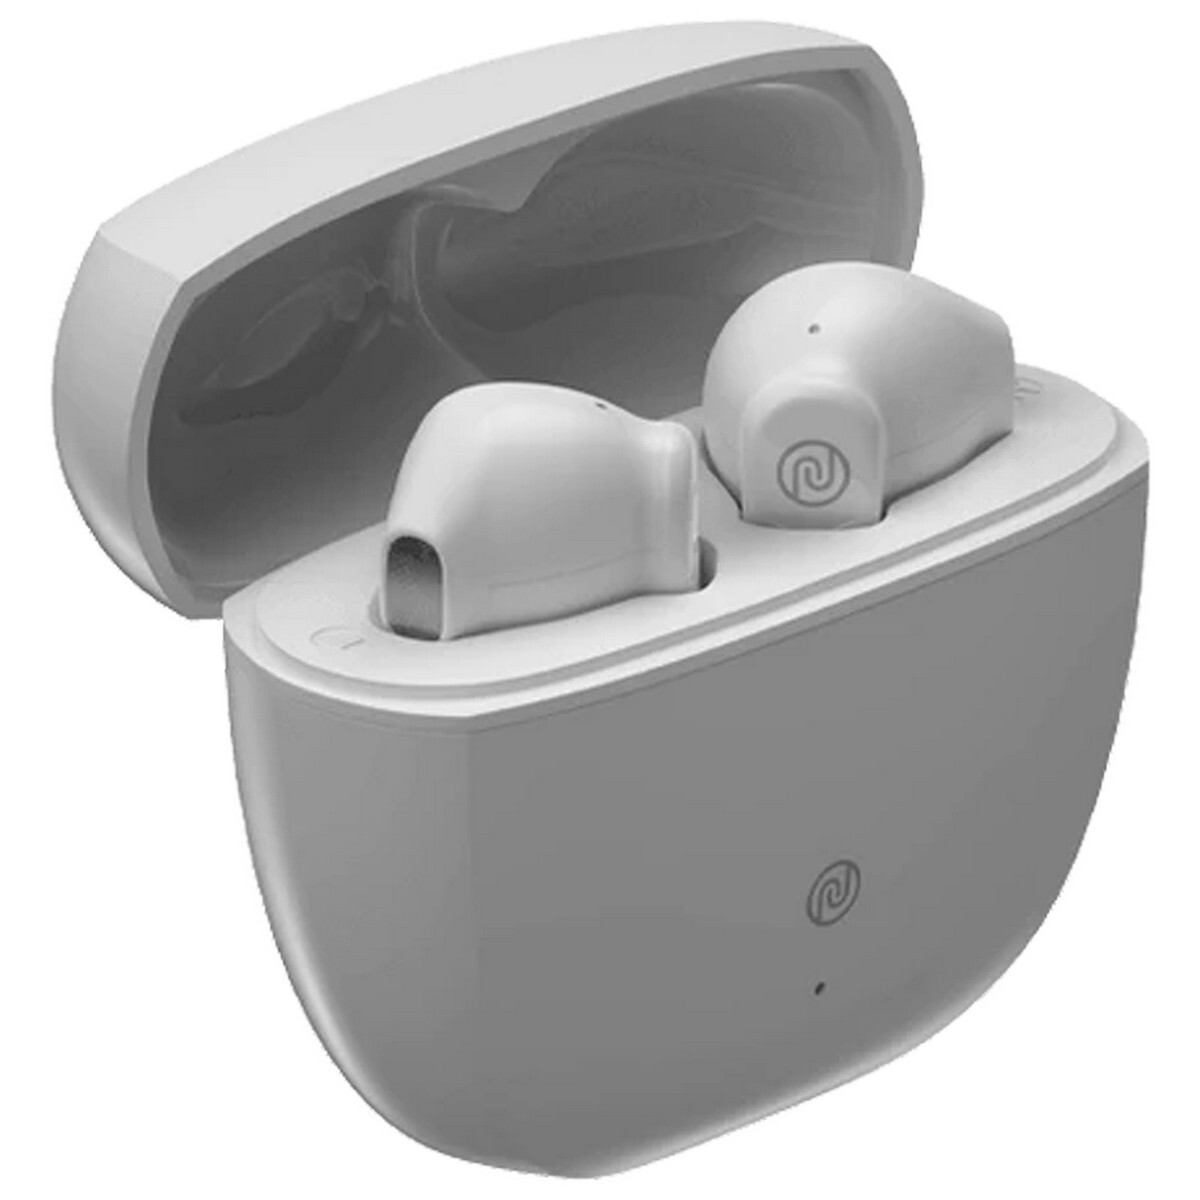 Noise Ace Truly Wireless Earbuds Snow White